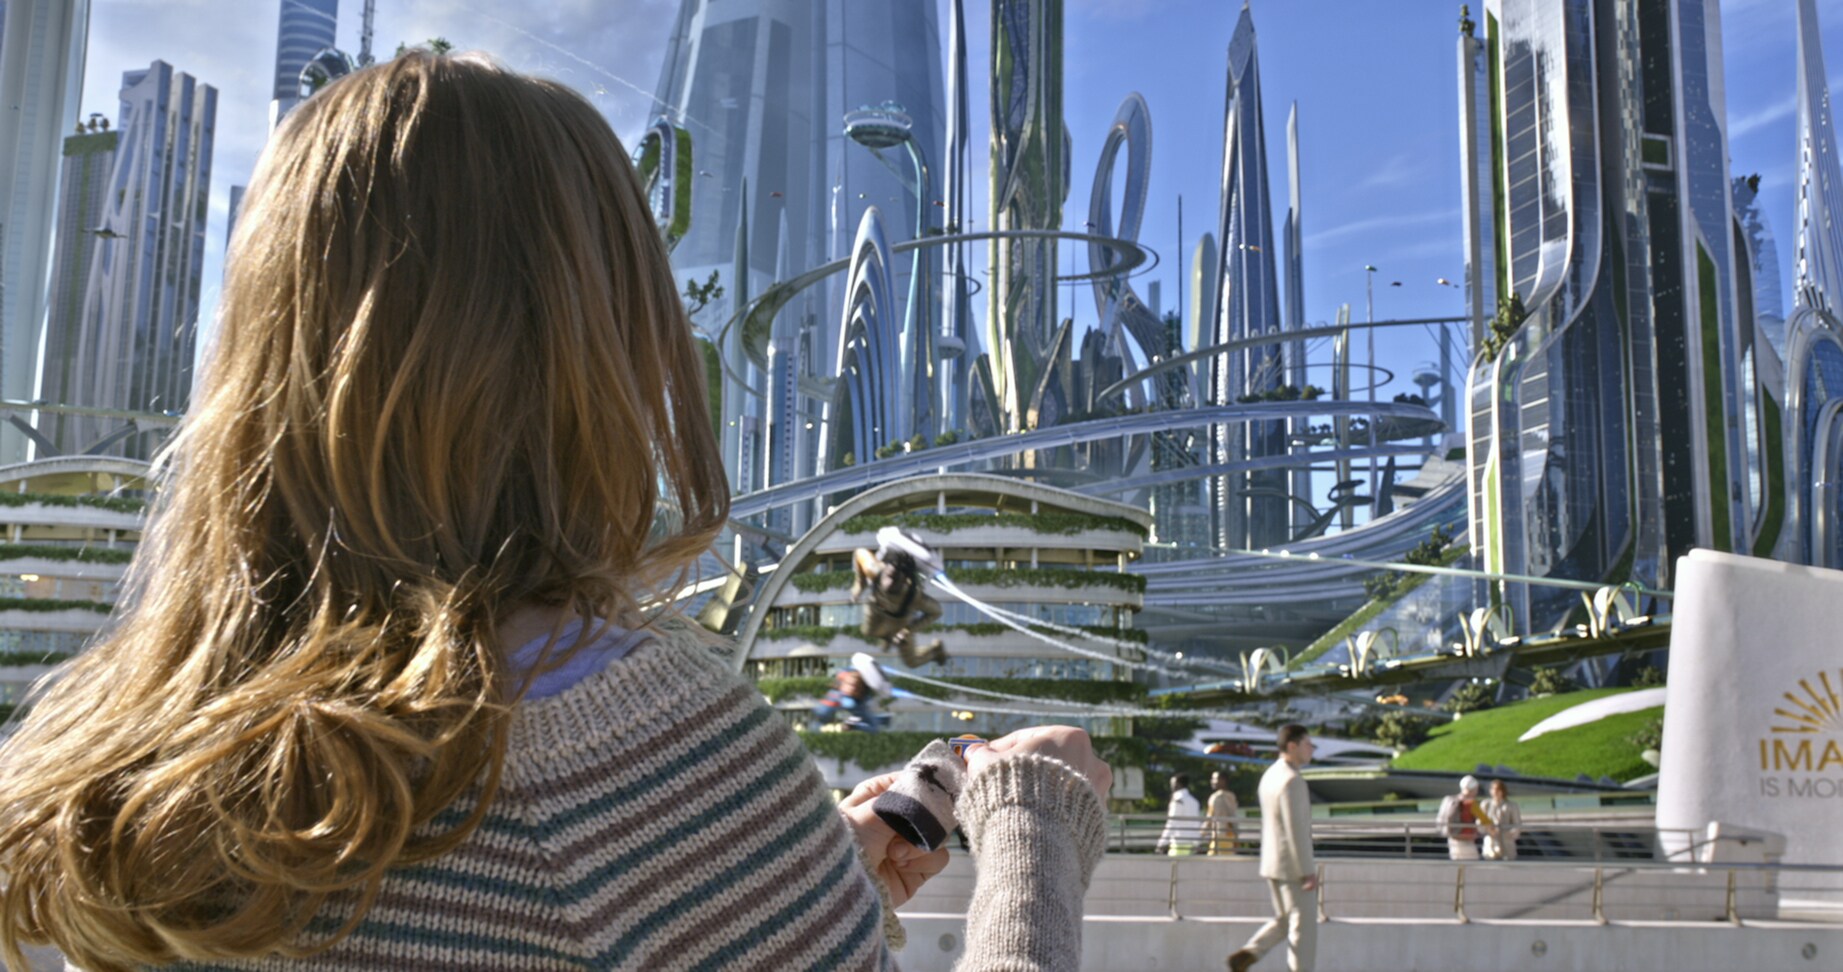 Image of Tomorrowland from the movie "Tomorrowland"